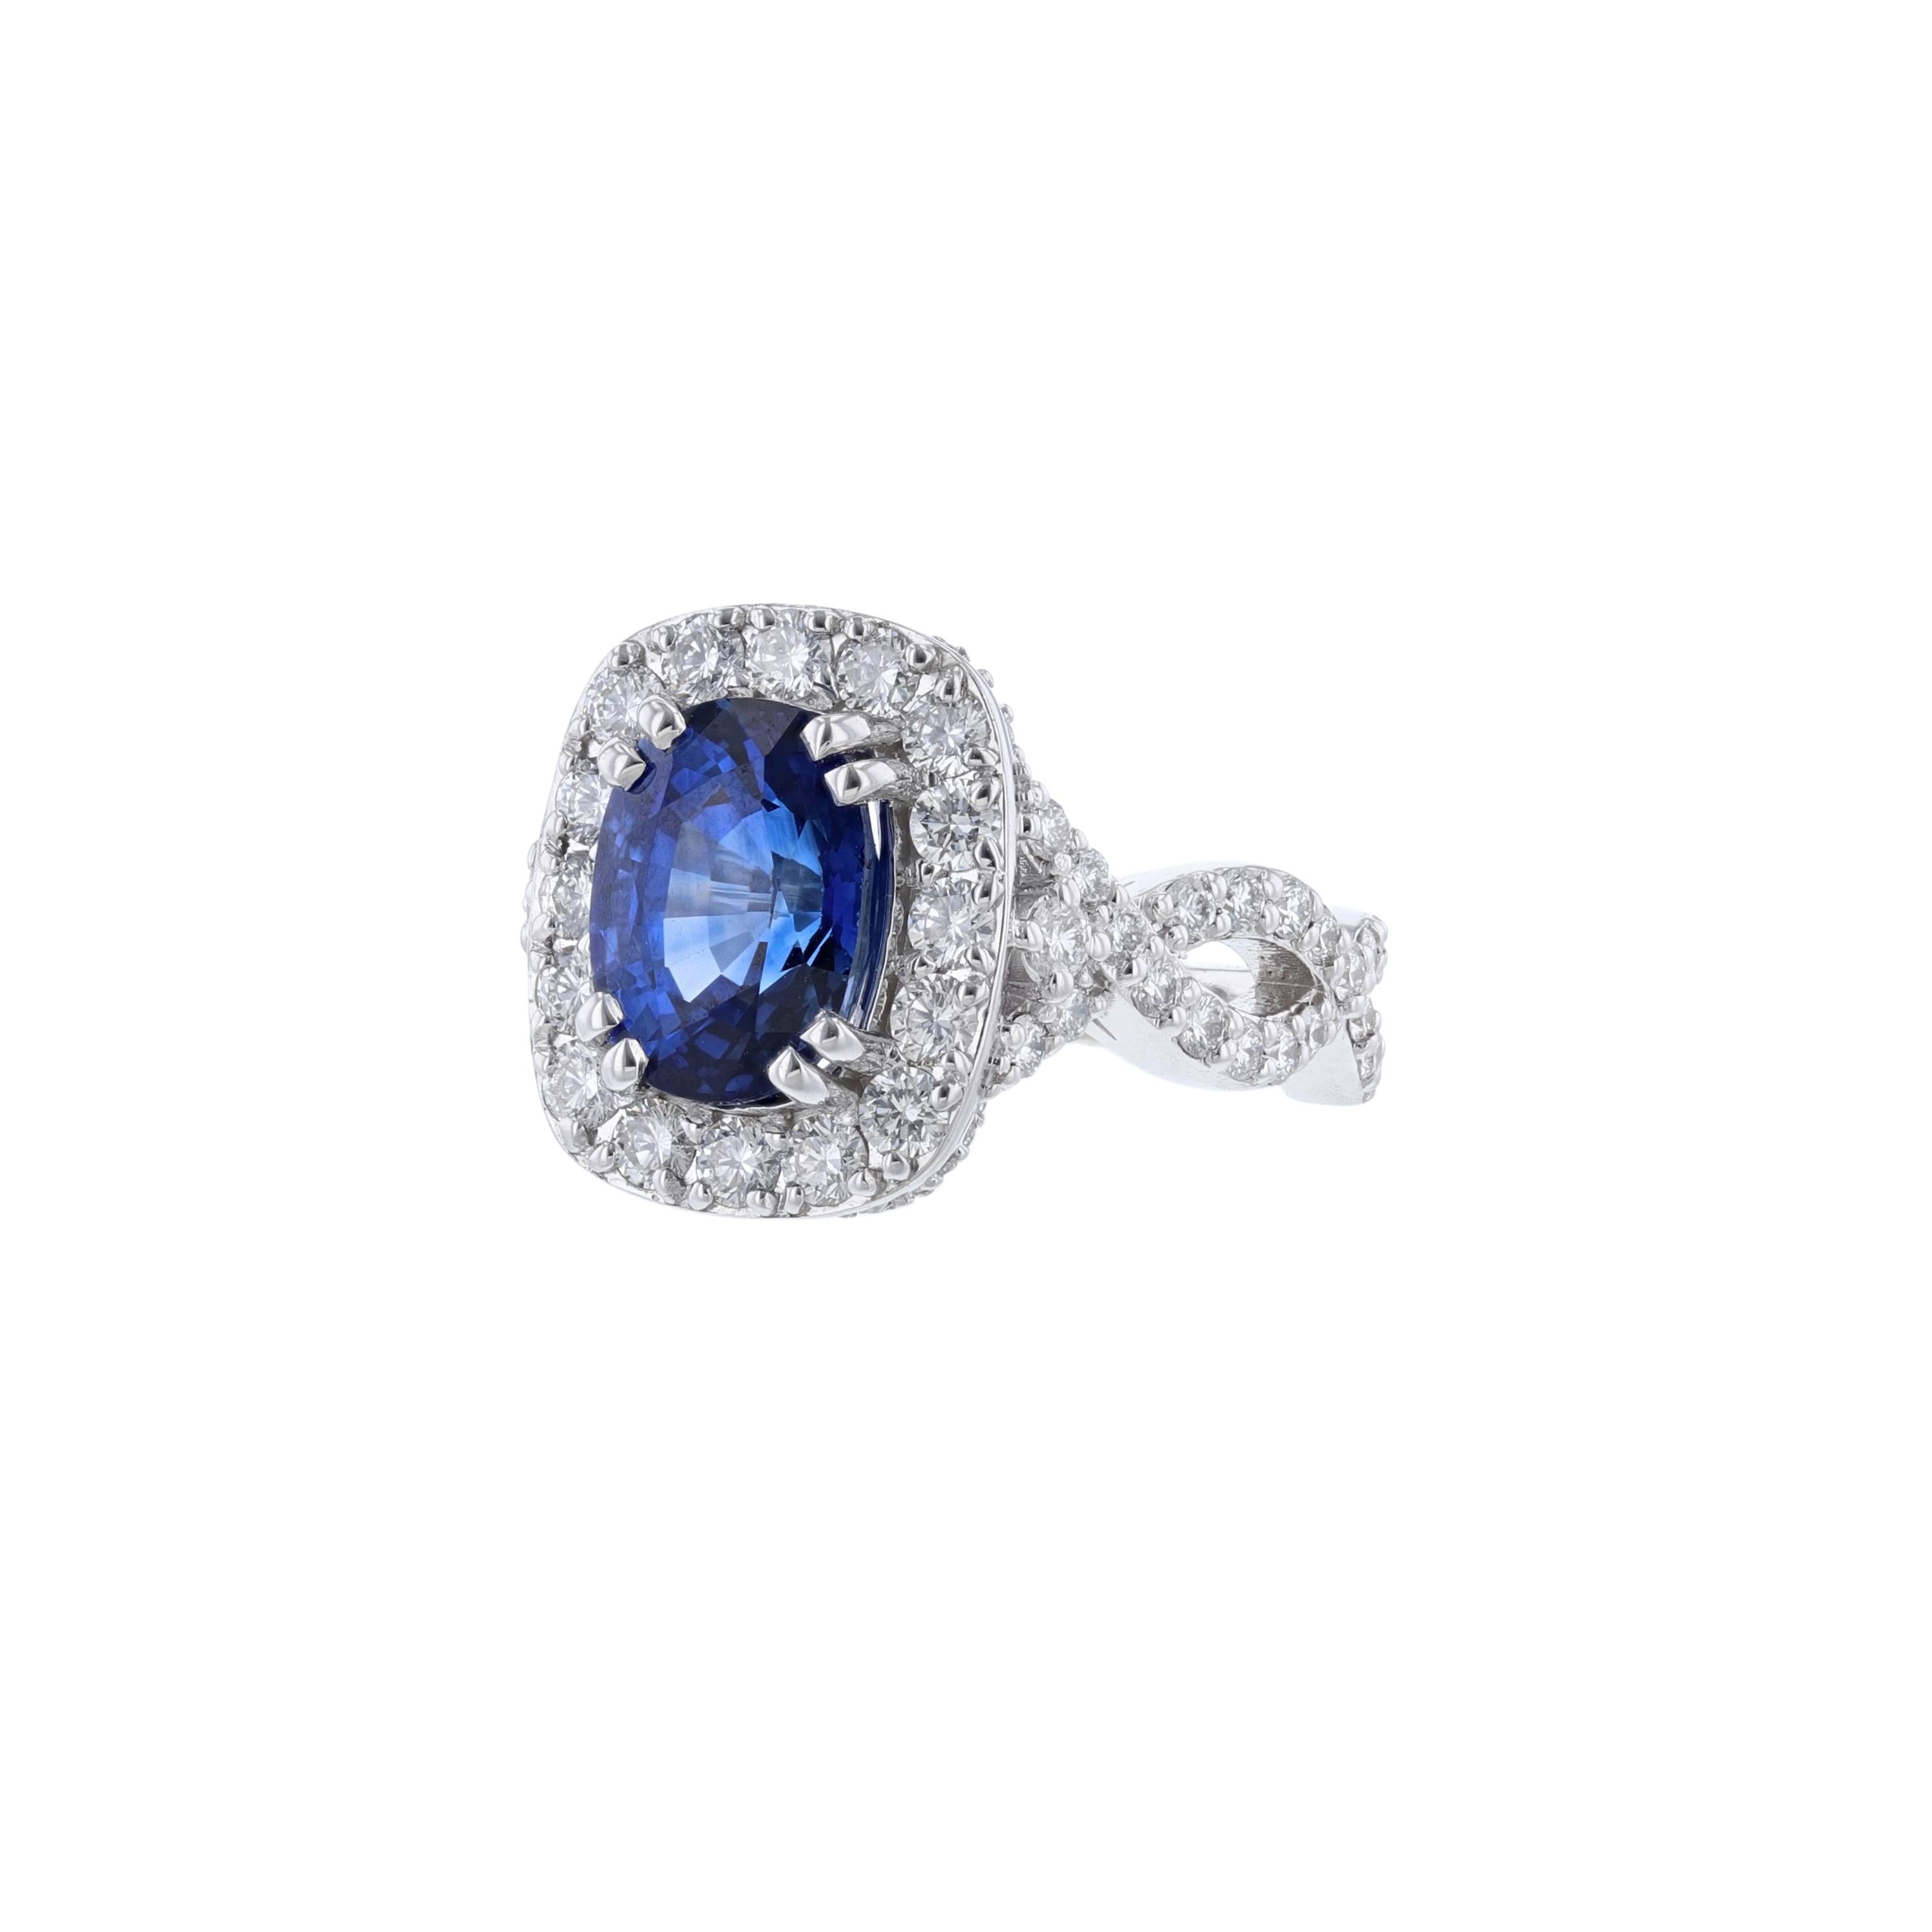 This ring is made in 14K white gold and features 1 oval-cut, natural corundum, blue sapphire from Madagascar weighing 1.42 carats. The stone is GIA certified with GIA 2205469297. Surrounded by 92 round cut diamonds weighing 1.59 carats. With a color